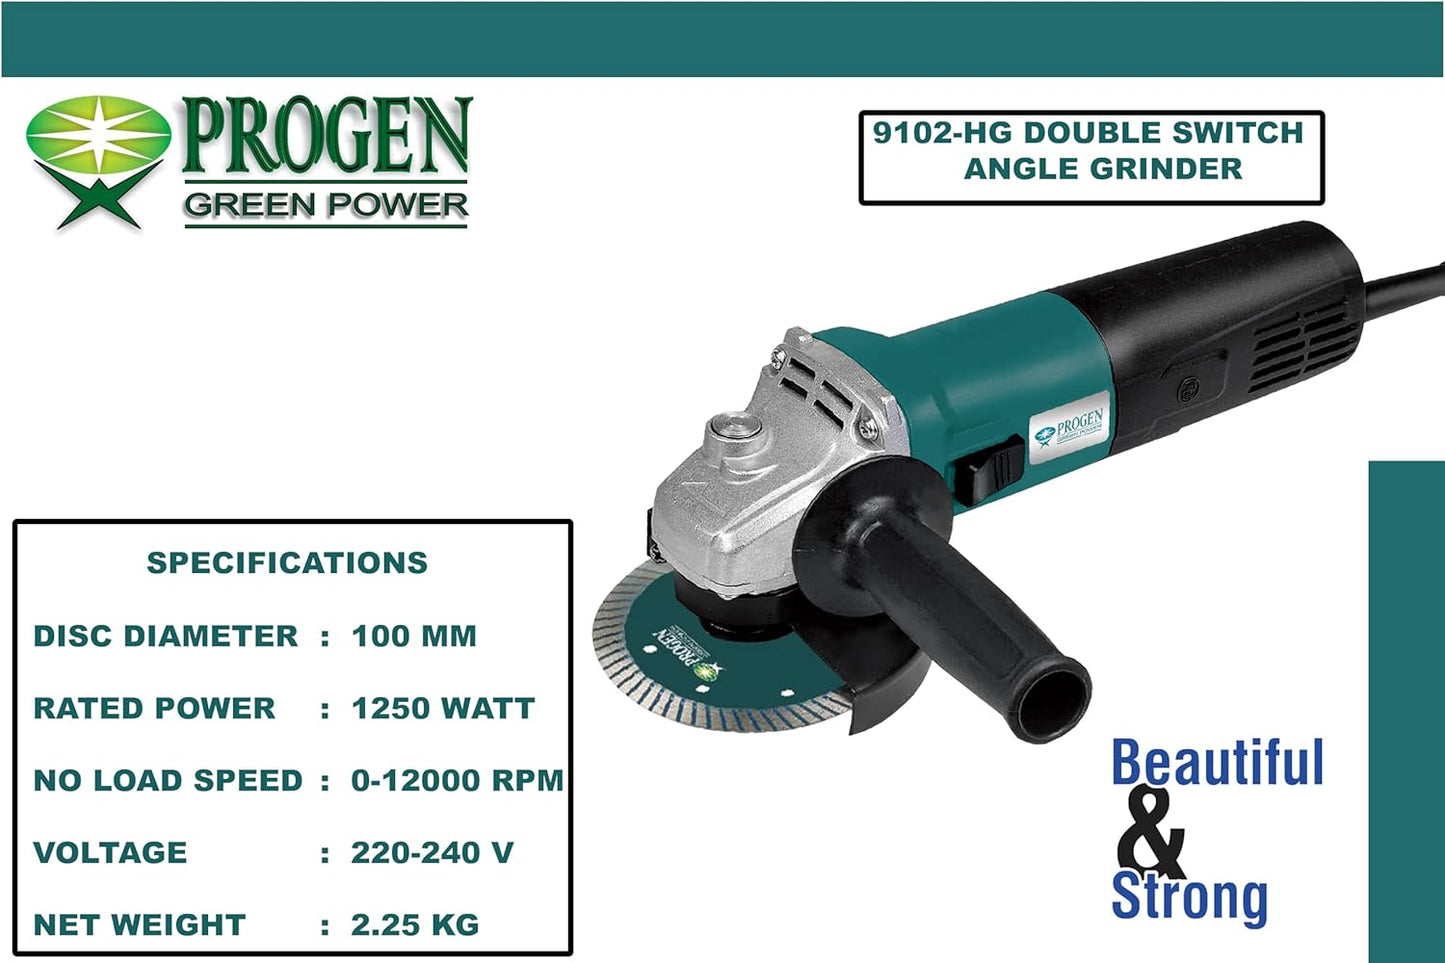 PROGEN 9102-HG, 1250W 4-inch Heavyduty Angle Grinder with Double Switch for Grinding, Cutting, Sharpening, Polishing, Removing Rust (12000Rpm)